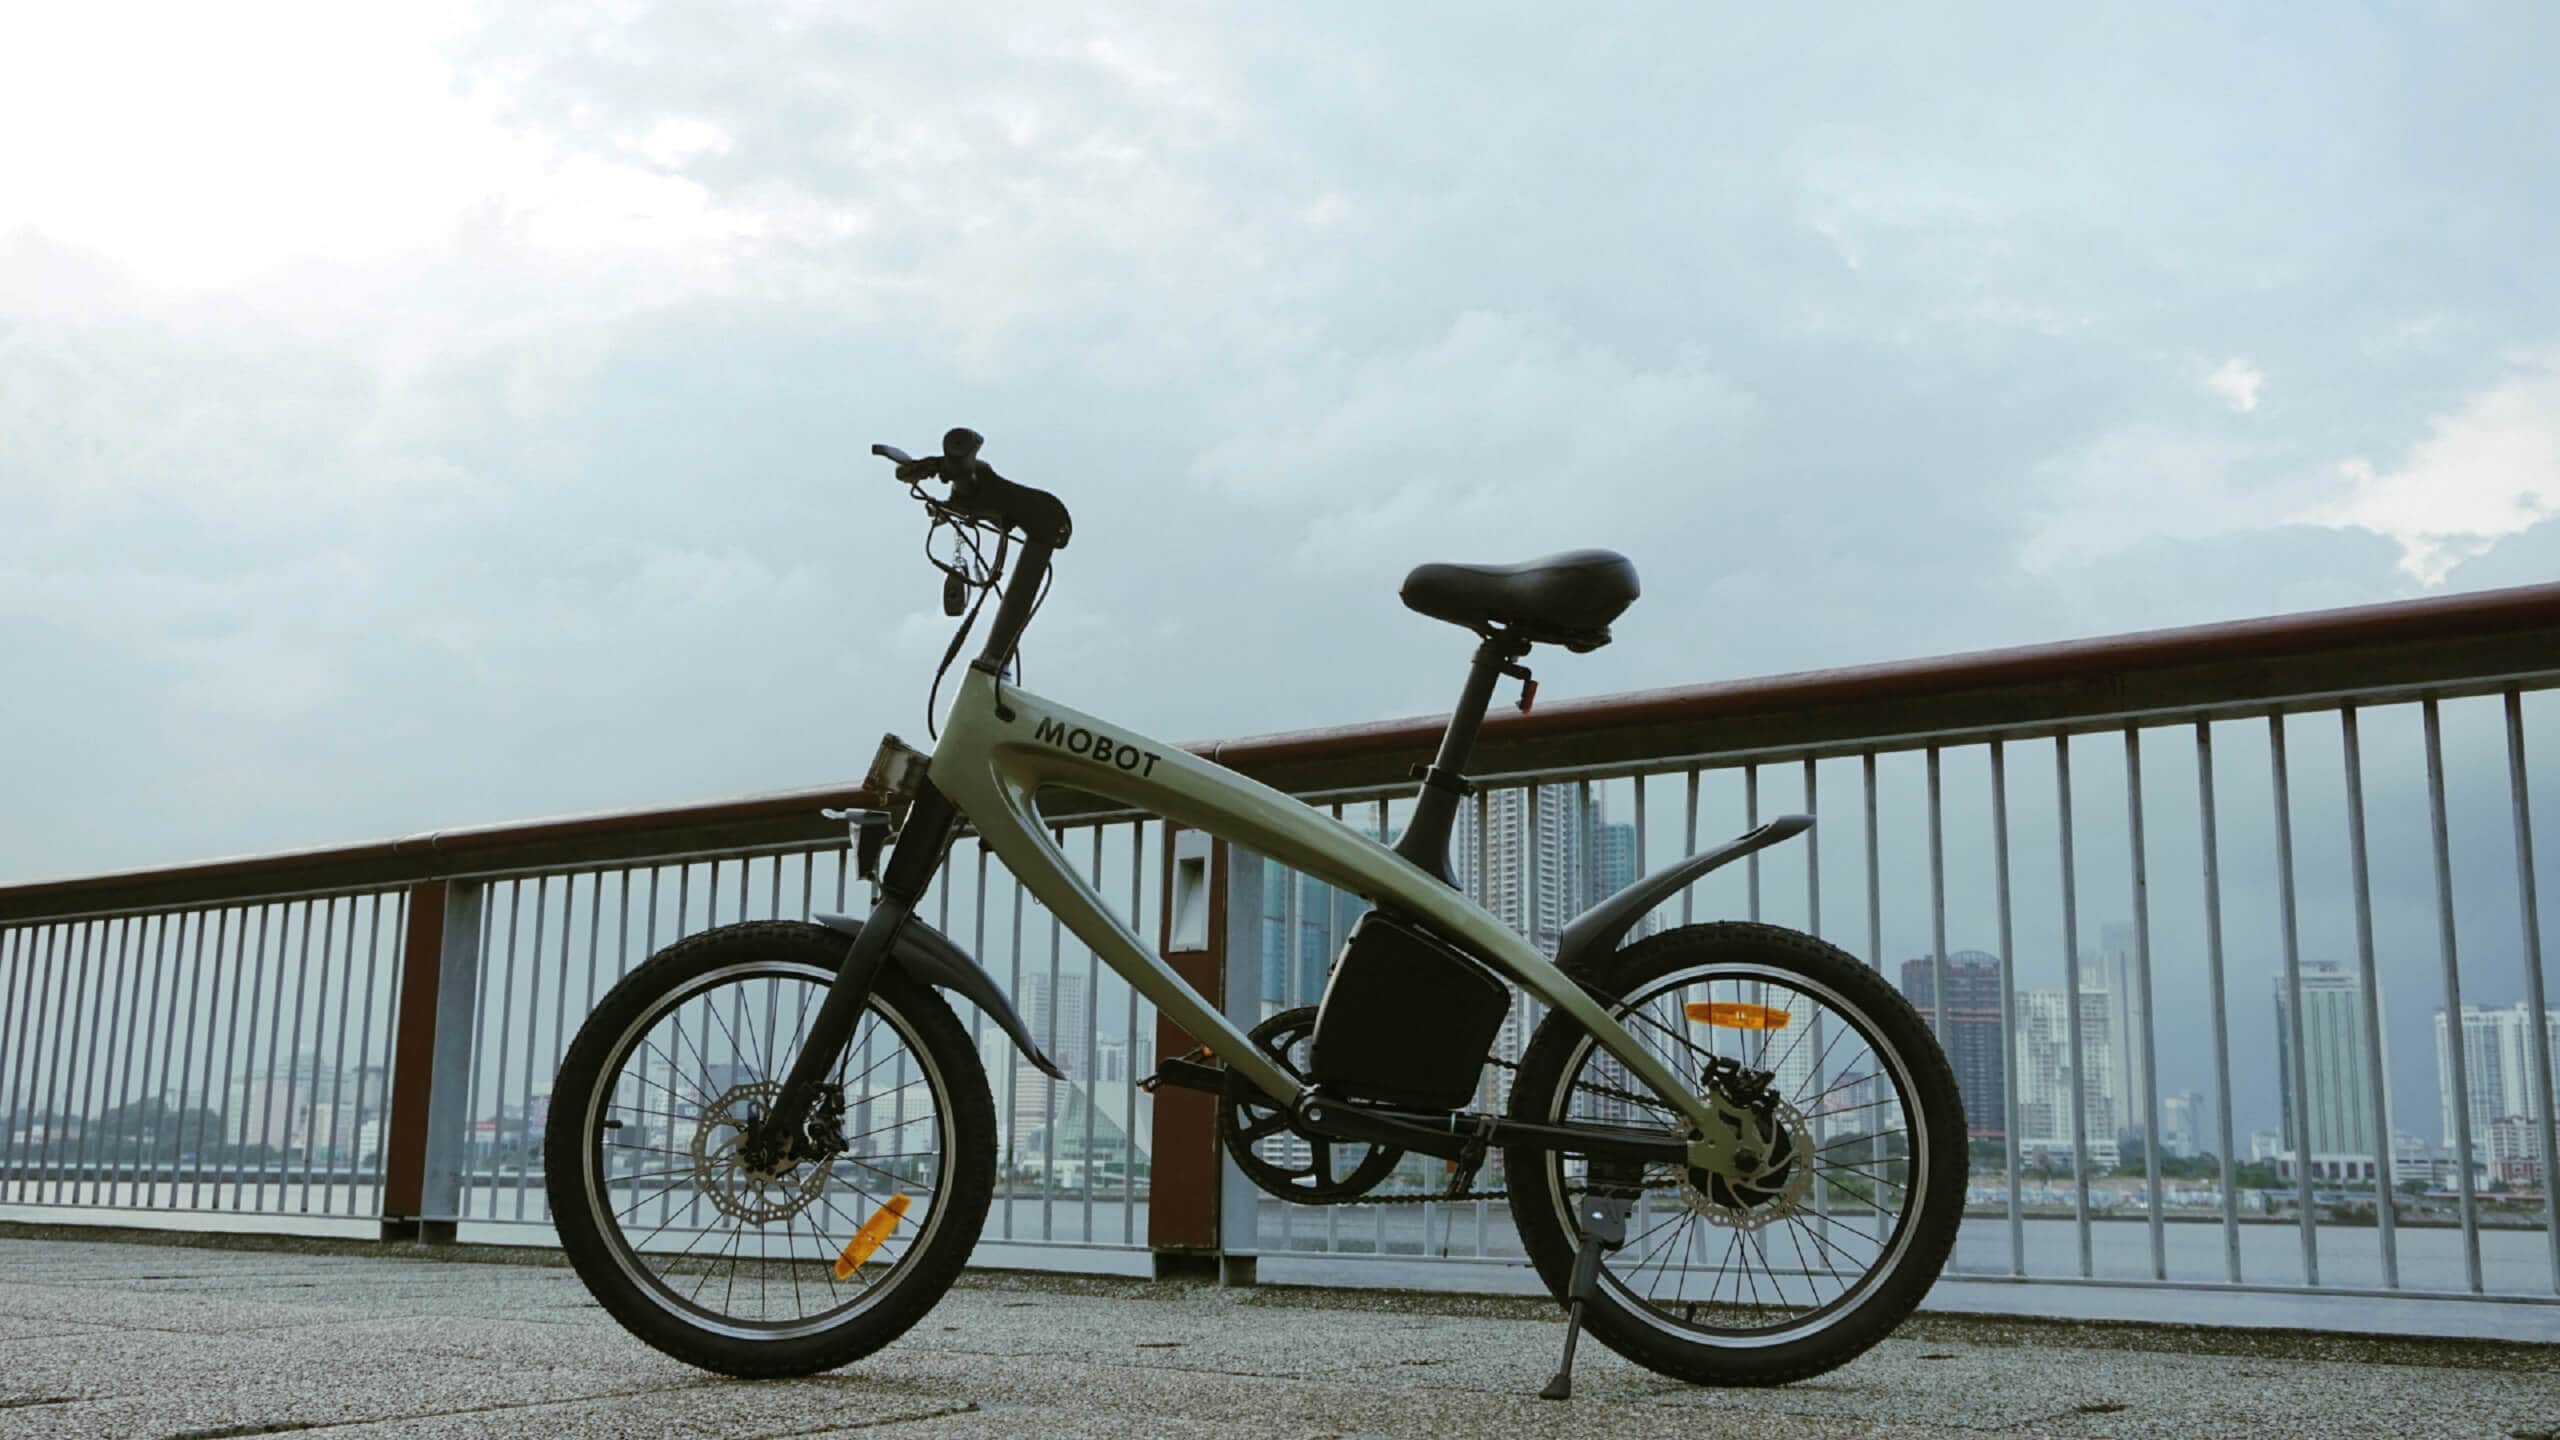 MOBOT OVO (GOLD) LTA approved ebike at Woodlands Waterfront